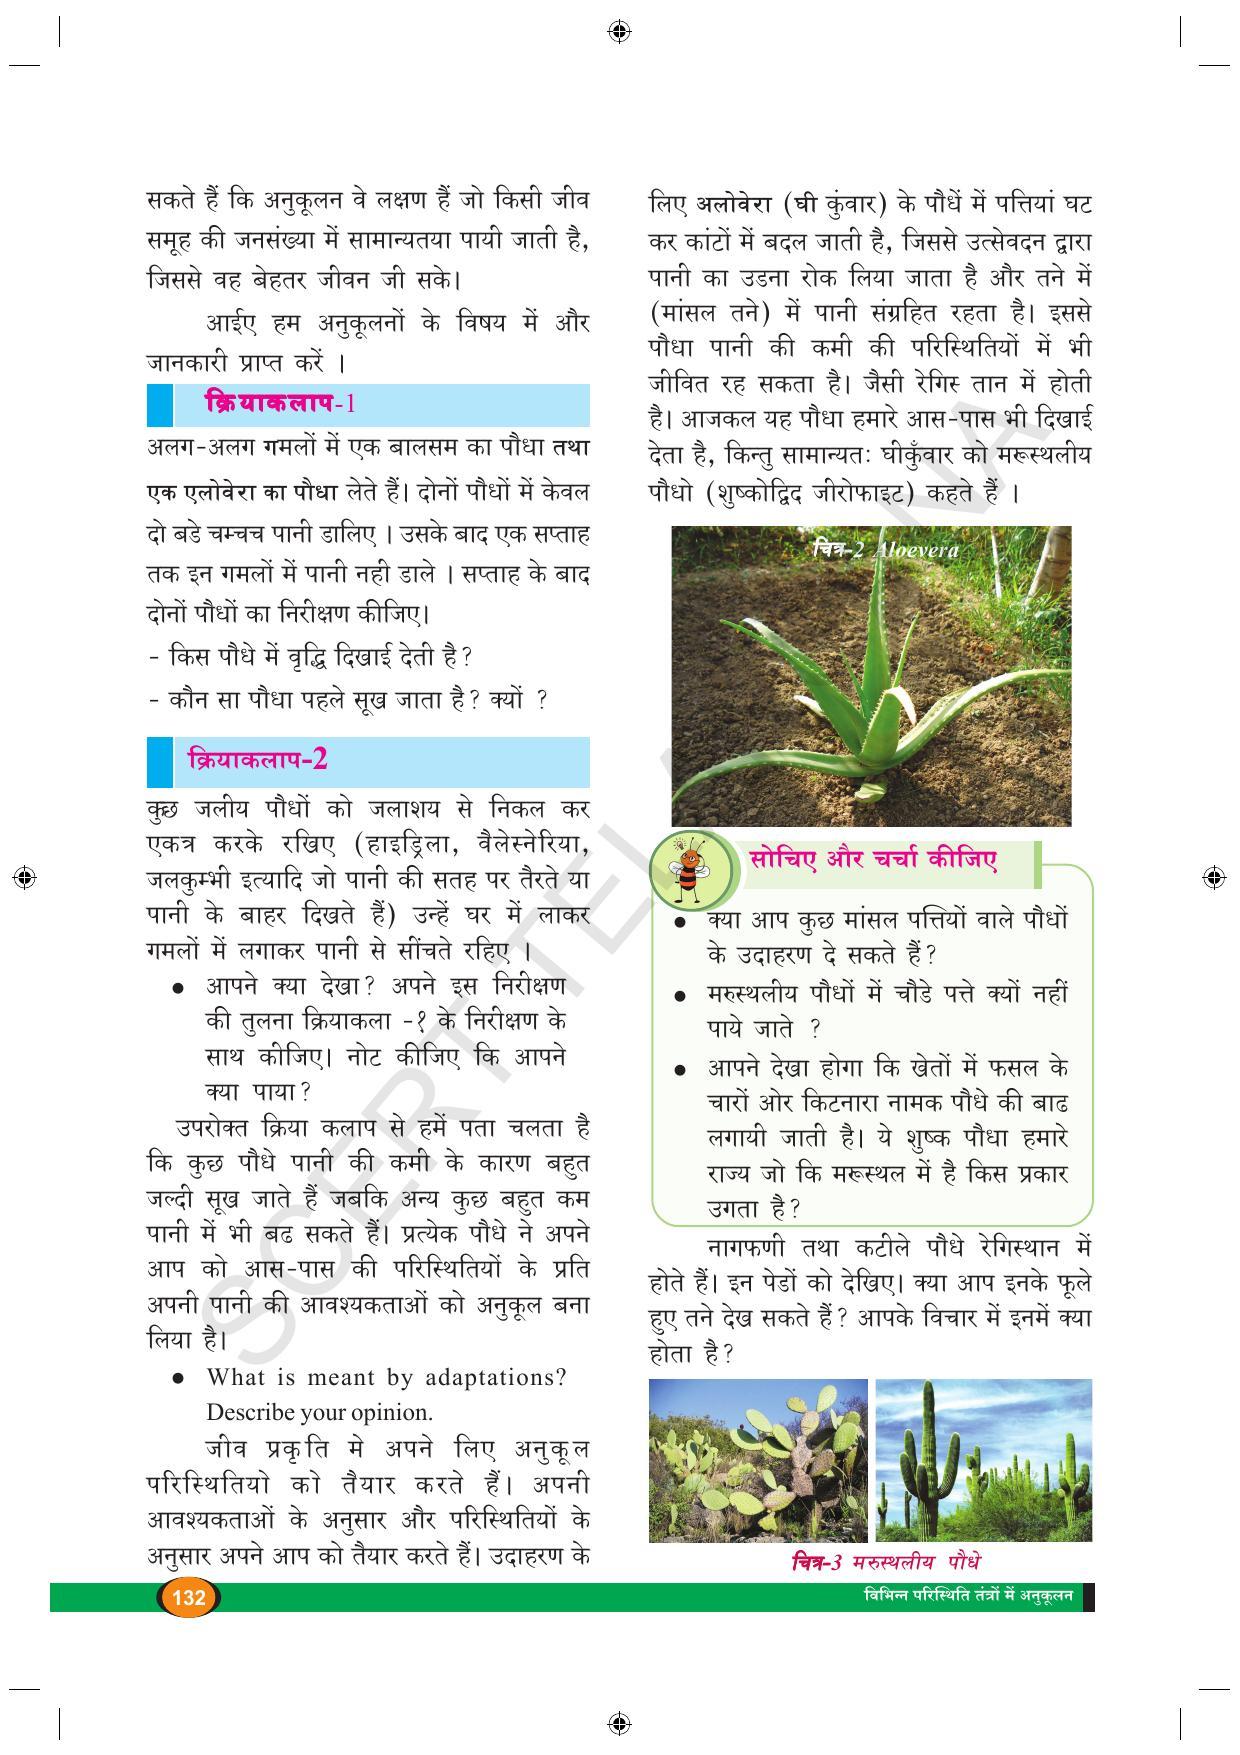 TS SCERT Class 9 Biological Science (Hindi Medium) Text Book - Page 144